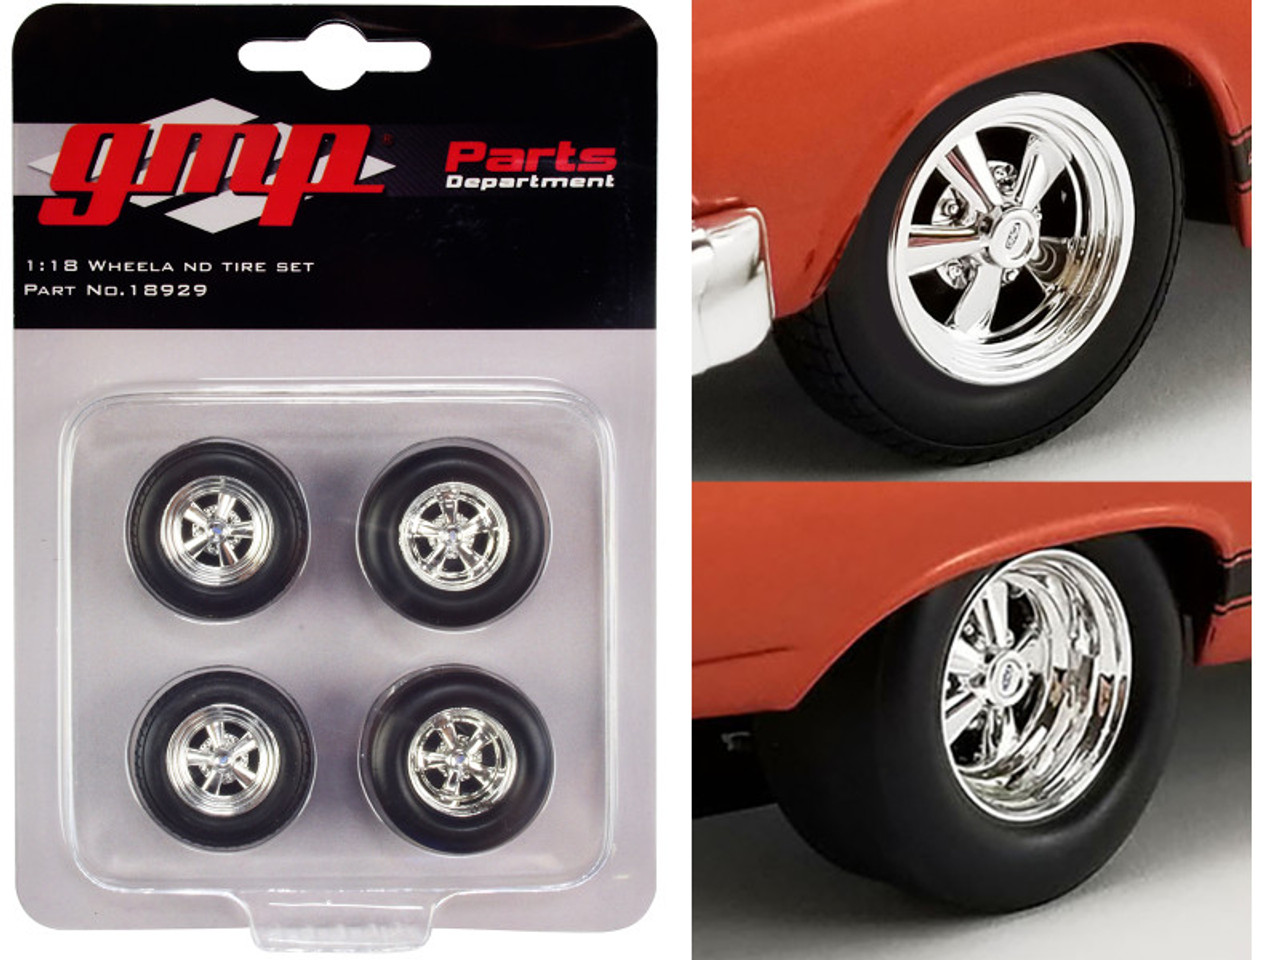 Drag Wheels and Tires Set of 4 pieces from "1967 Ford Fairlane SOHC Street Machine" 1/18 Scale Model by GMP